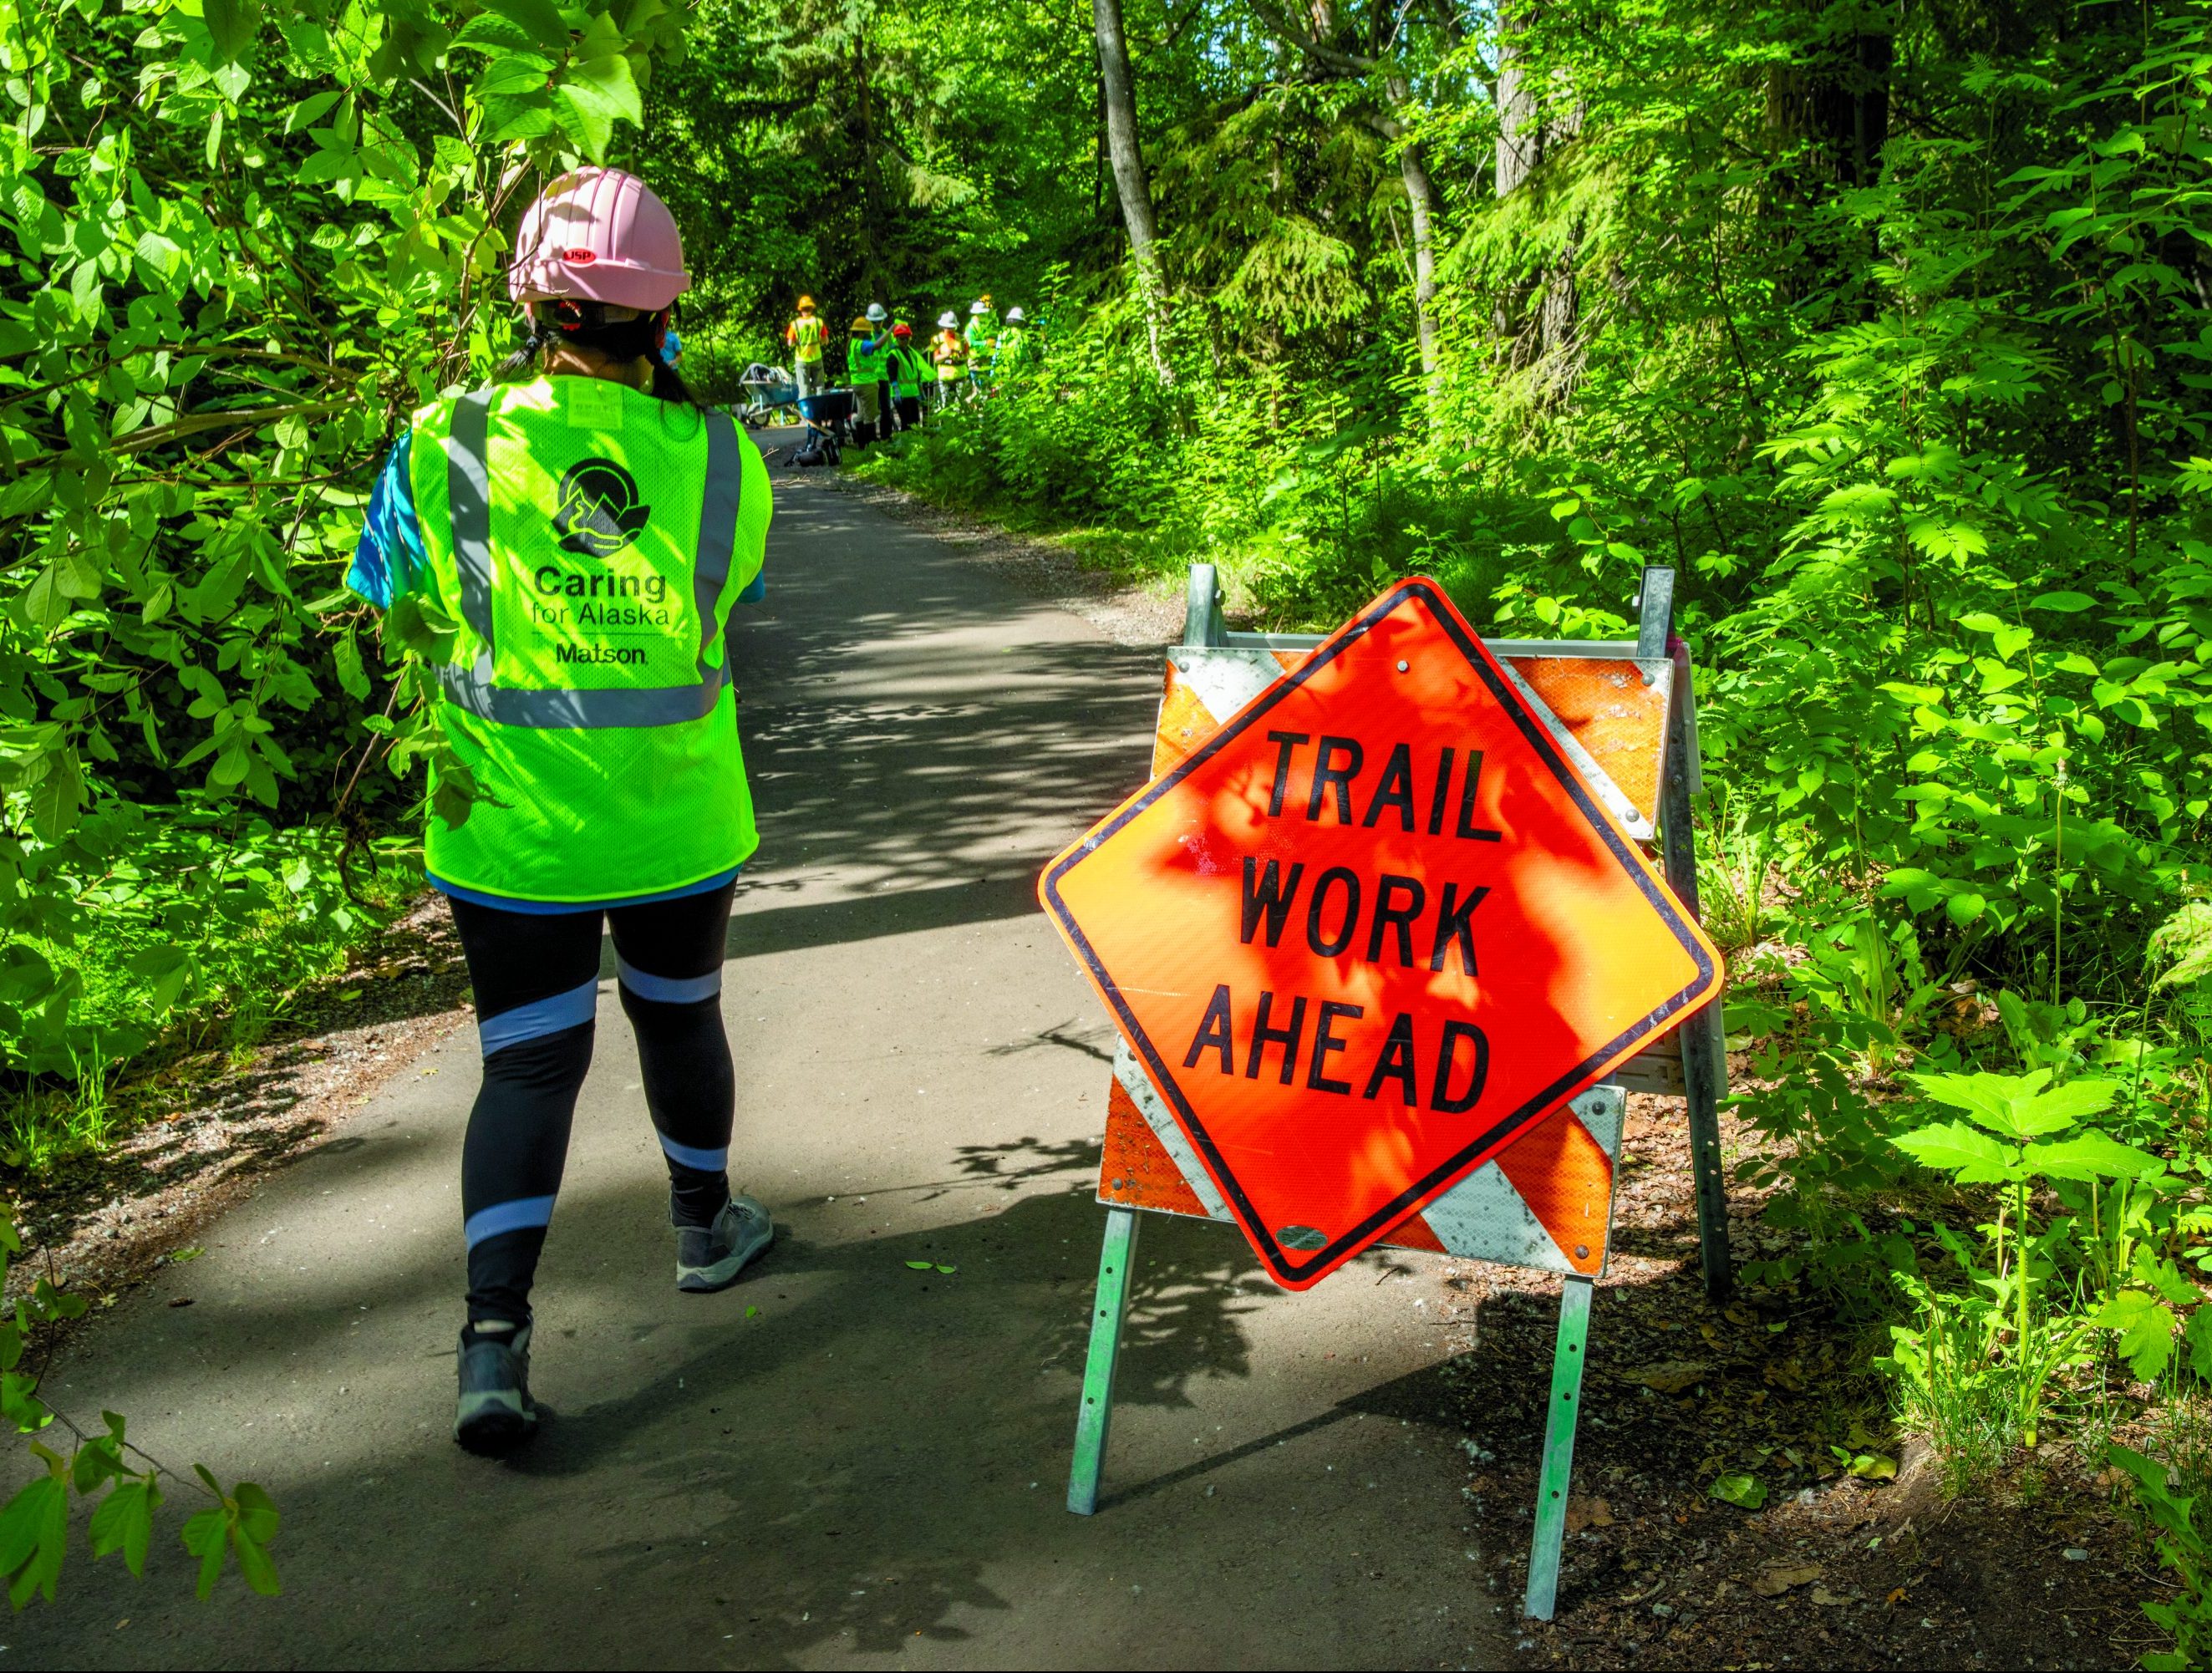 An Anchorage Park Foundation’s Youth Employment in Parks participant wearing a yellow Caring for Alaska vest walks past a Trail Work Ahead sign on a paved park path.